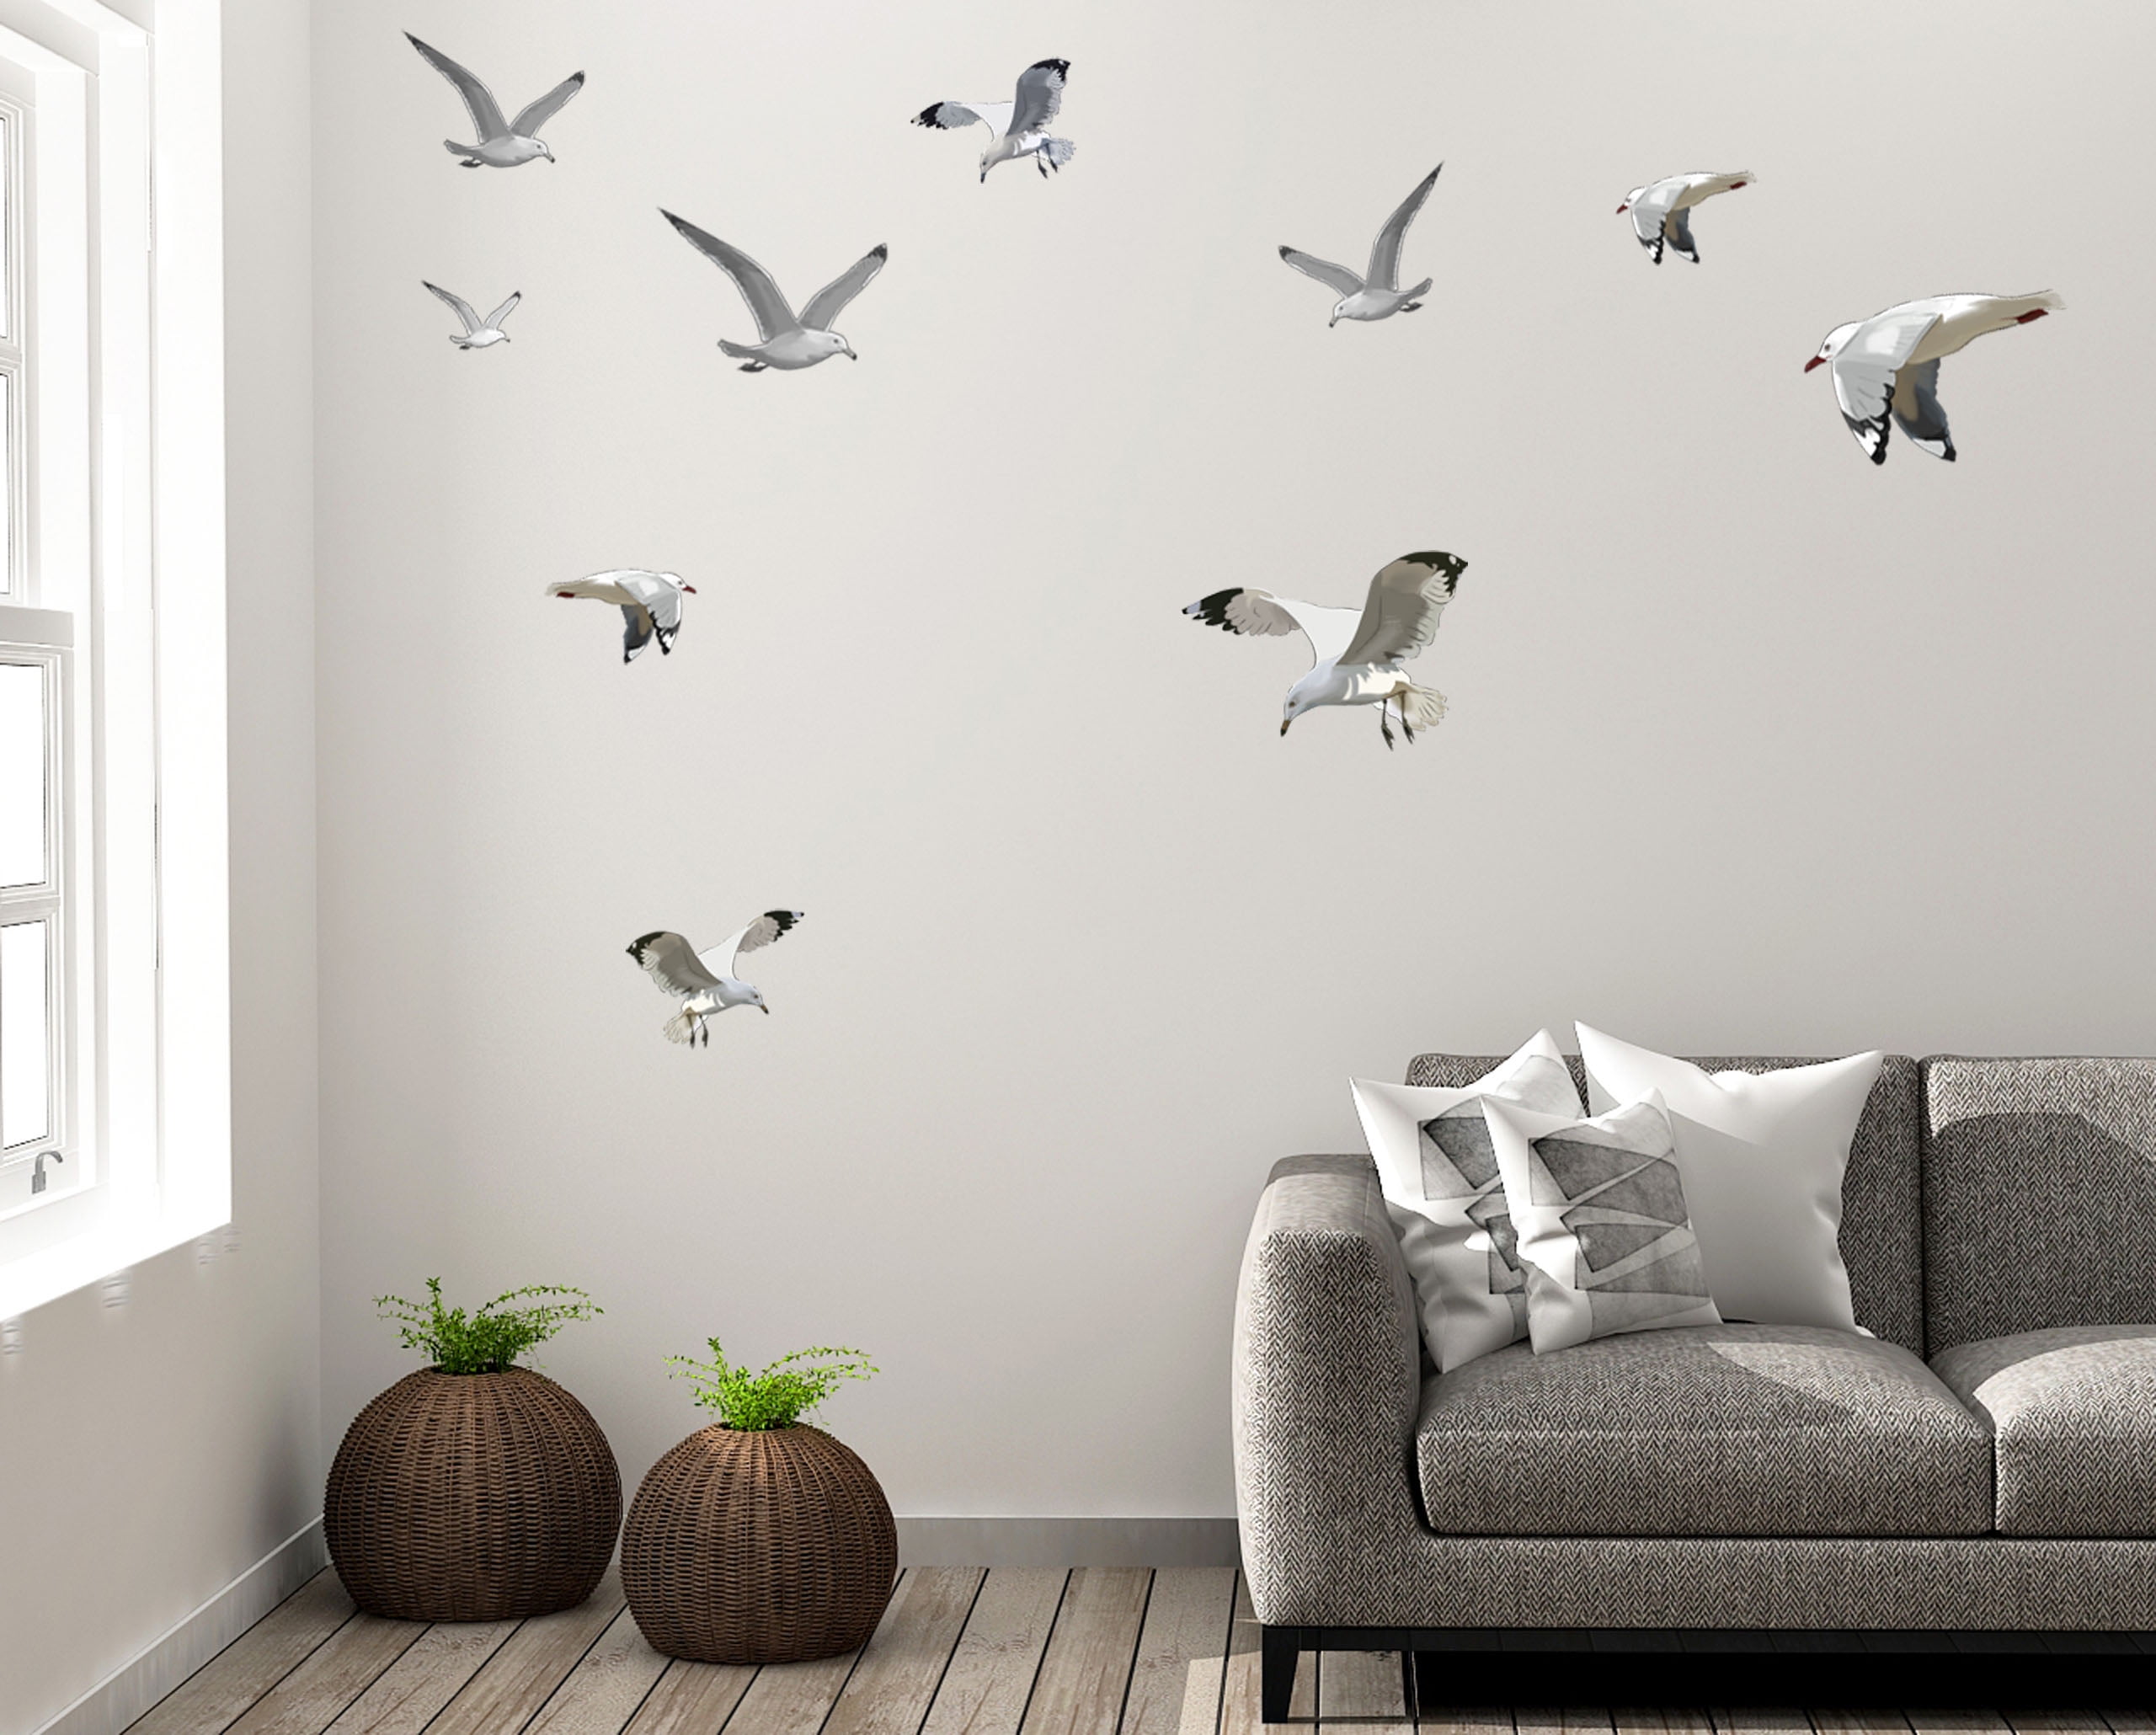 Poster Tree Birds House Height Measure Sticker Wall Sticker Home Decor Decals 